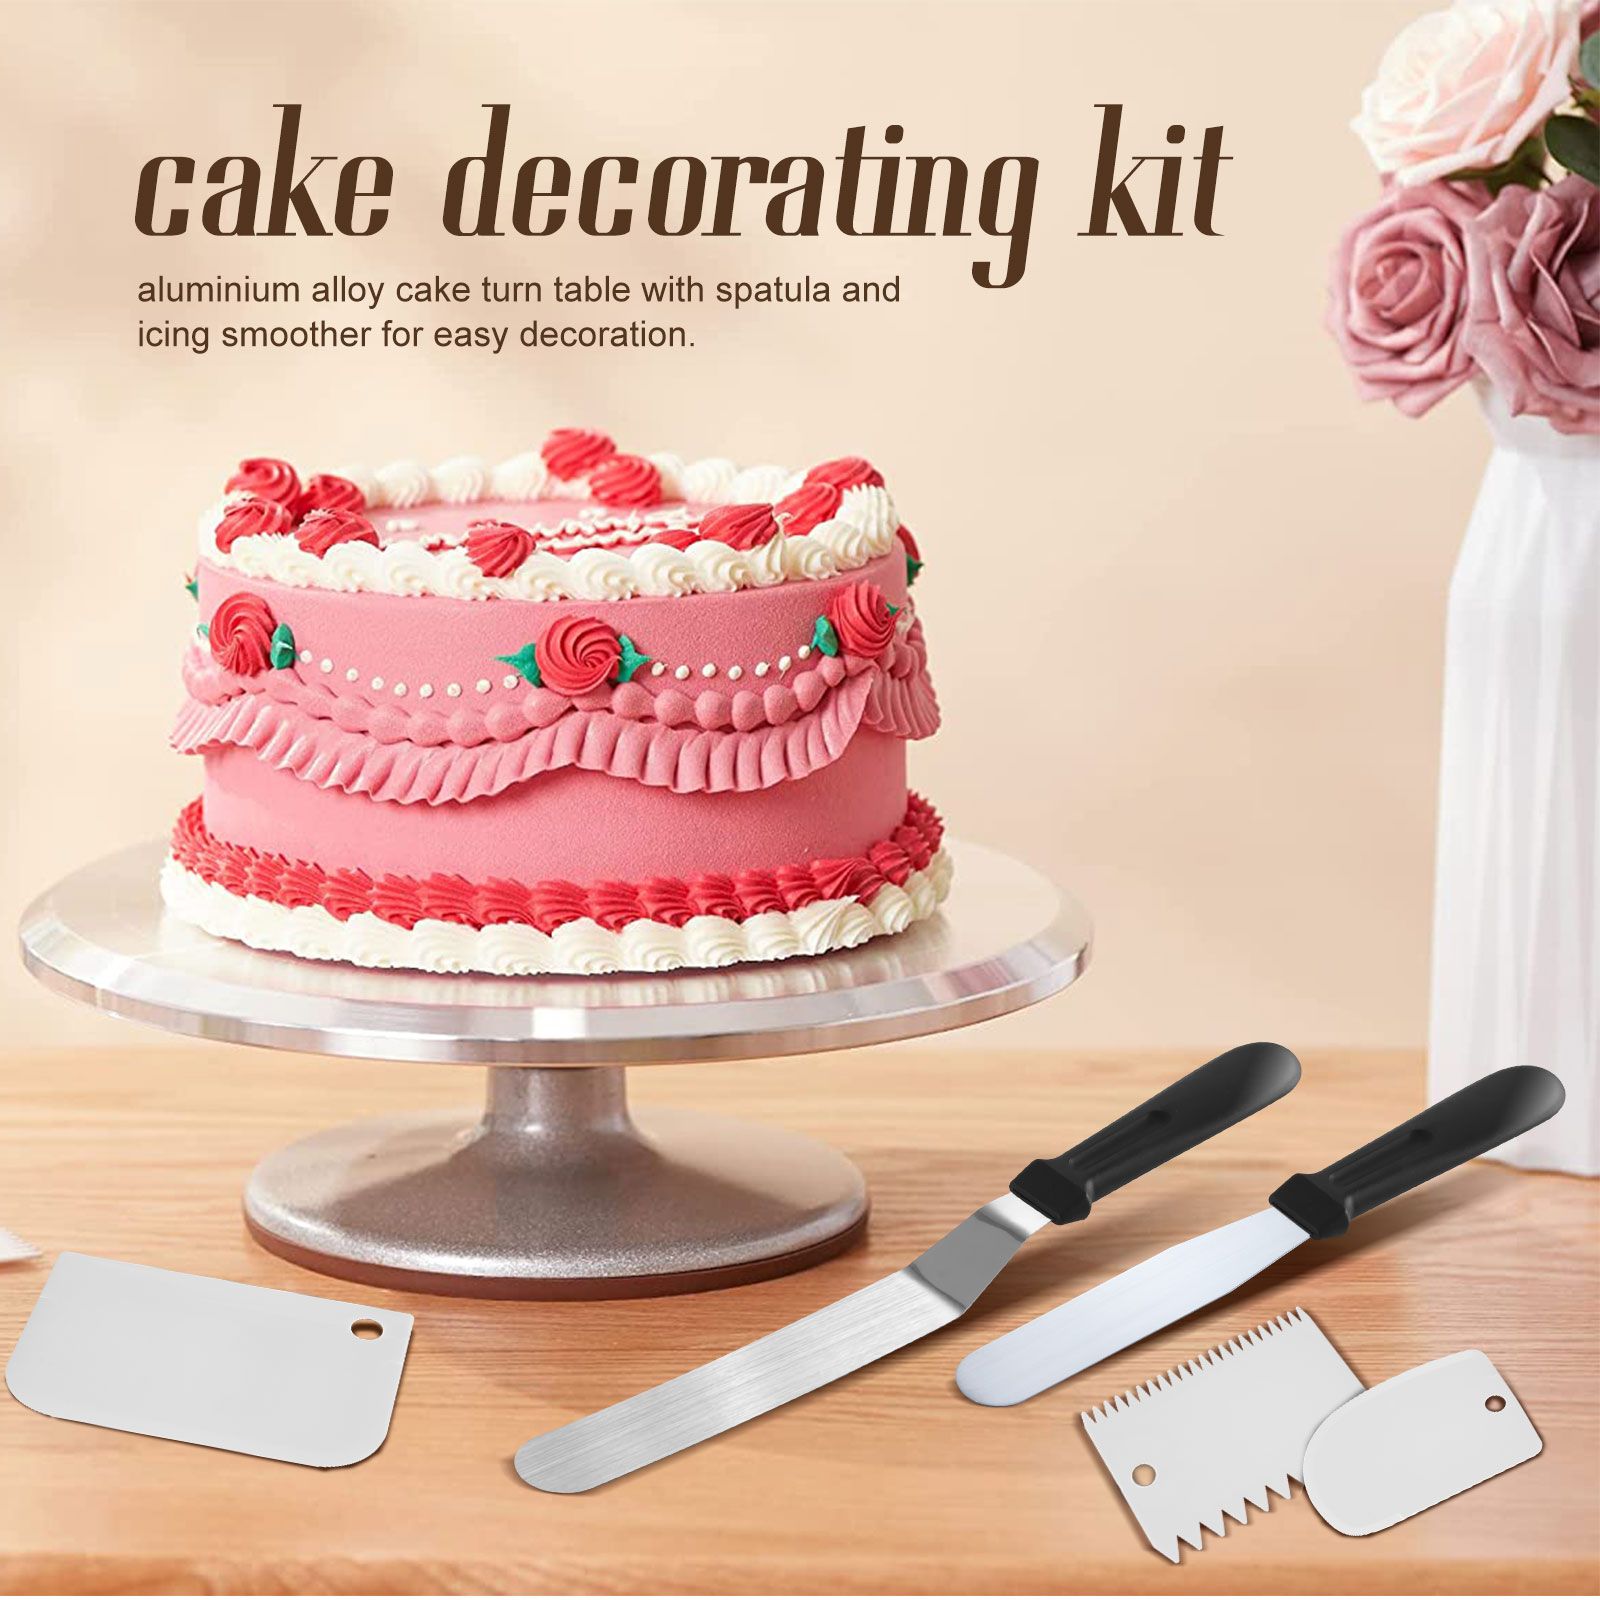 30cm Cake Turntable Stand 26Pcs Decorating Kit Supplies Baking Tools Rotating Stand Icing Piping Nozzle Spatula Cutter Pastry Bag Scraper Aluminium